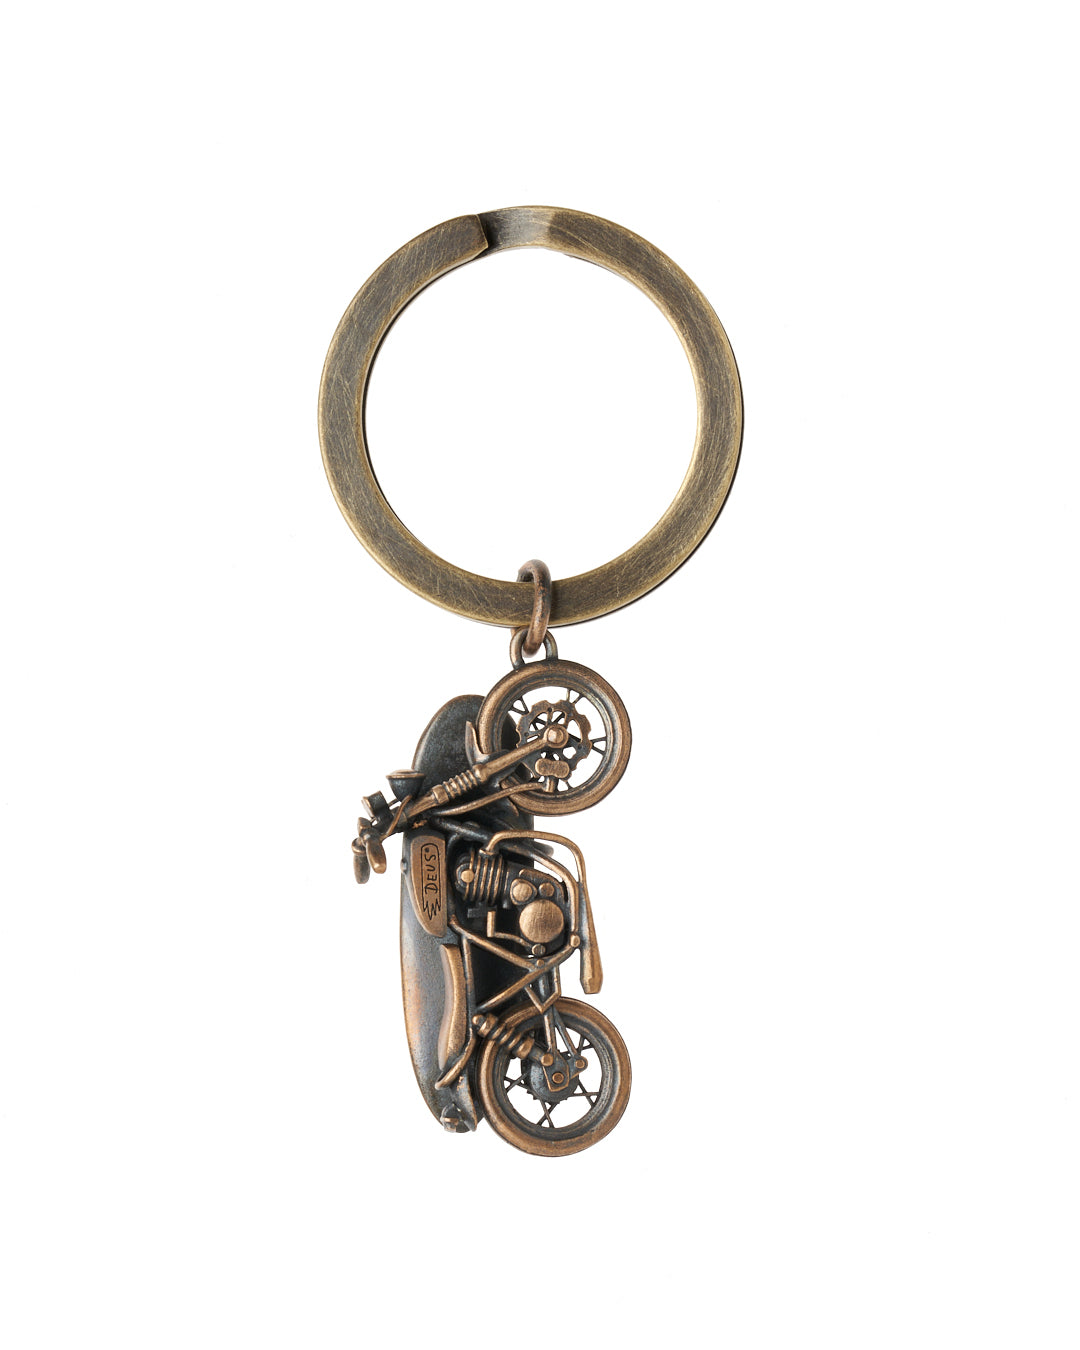 THE Drovers Dog KEYRING